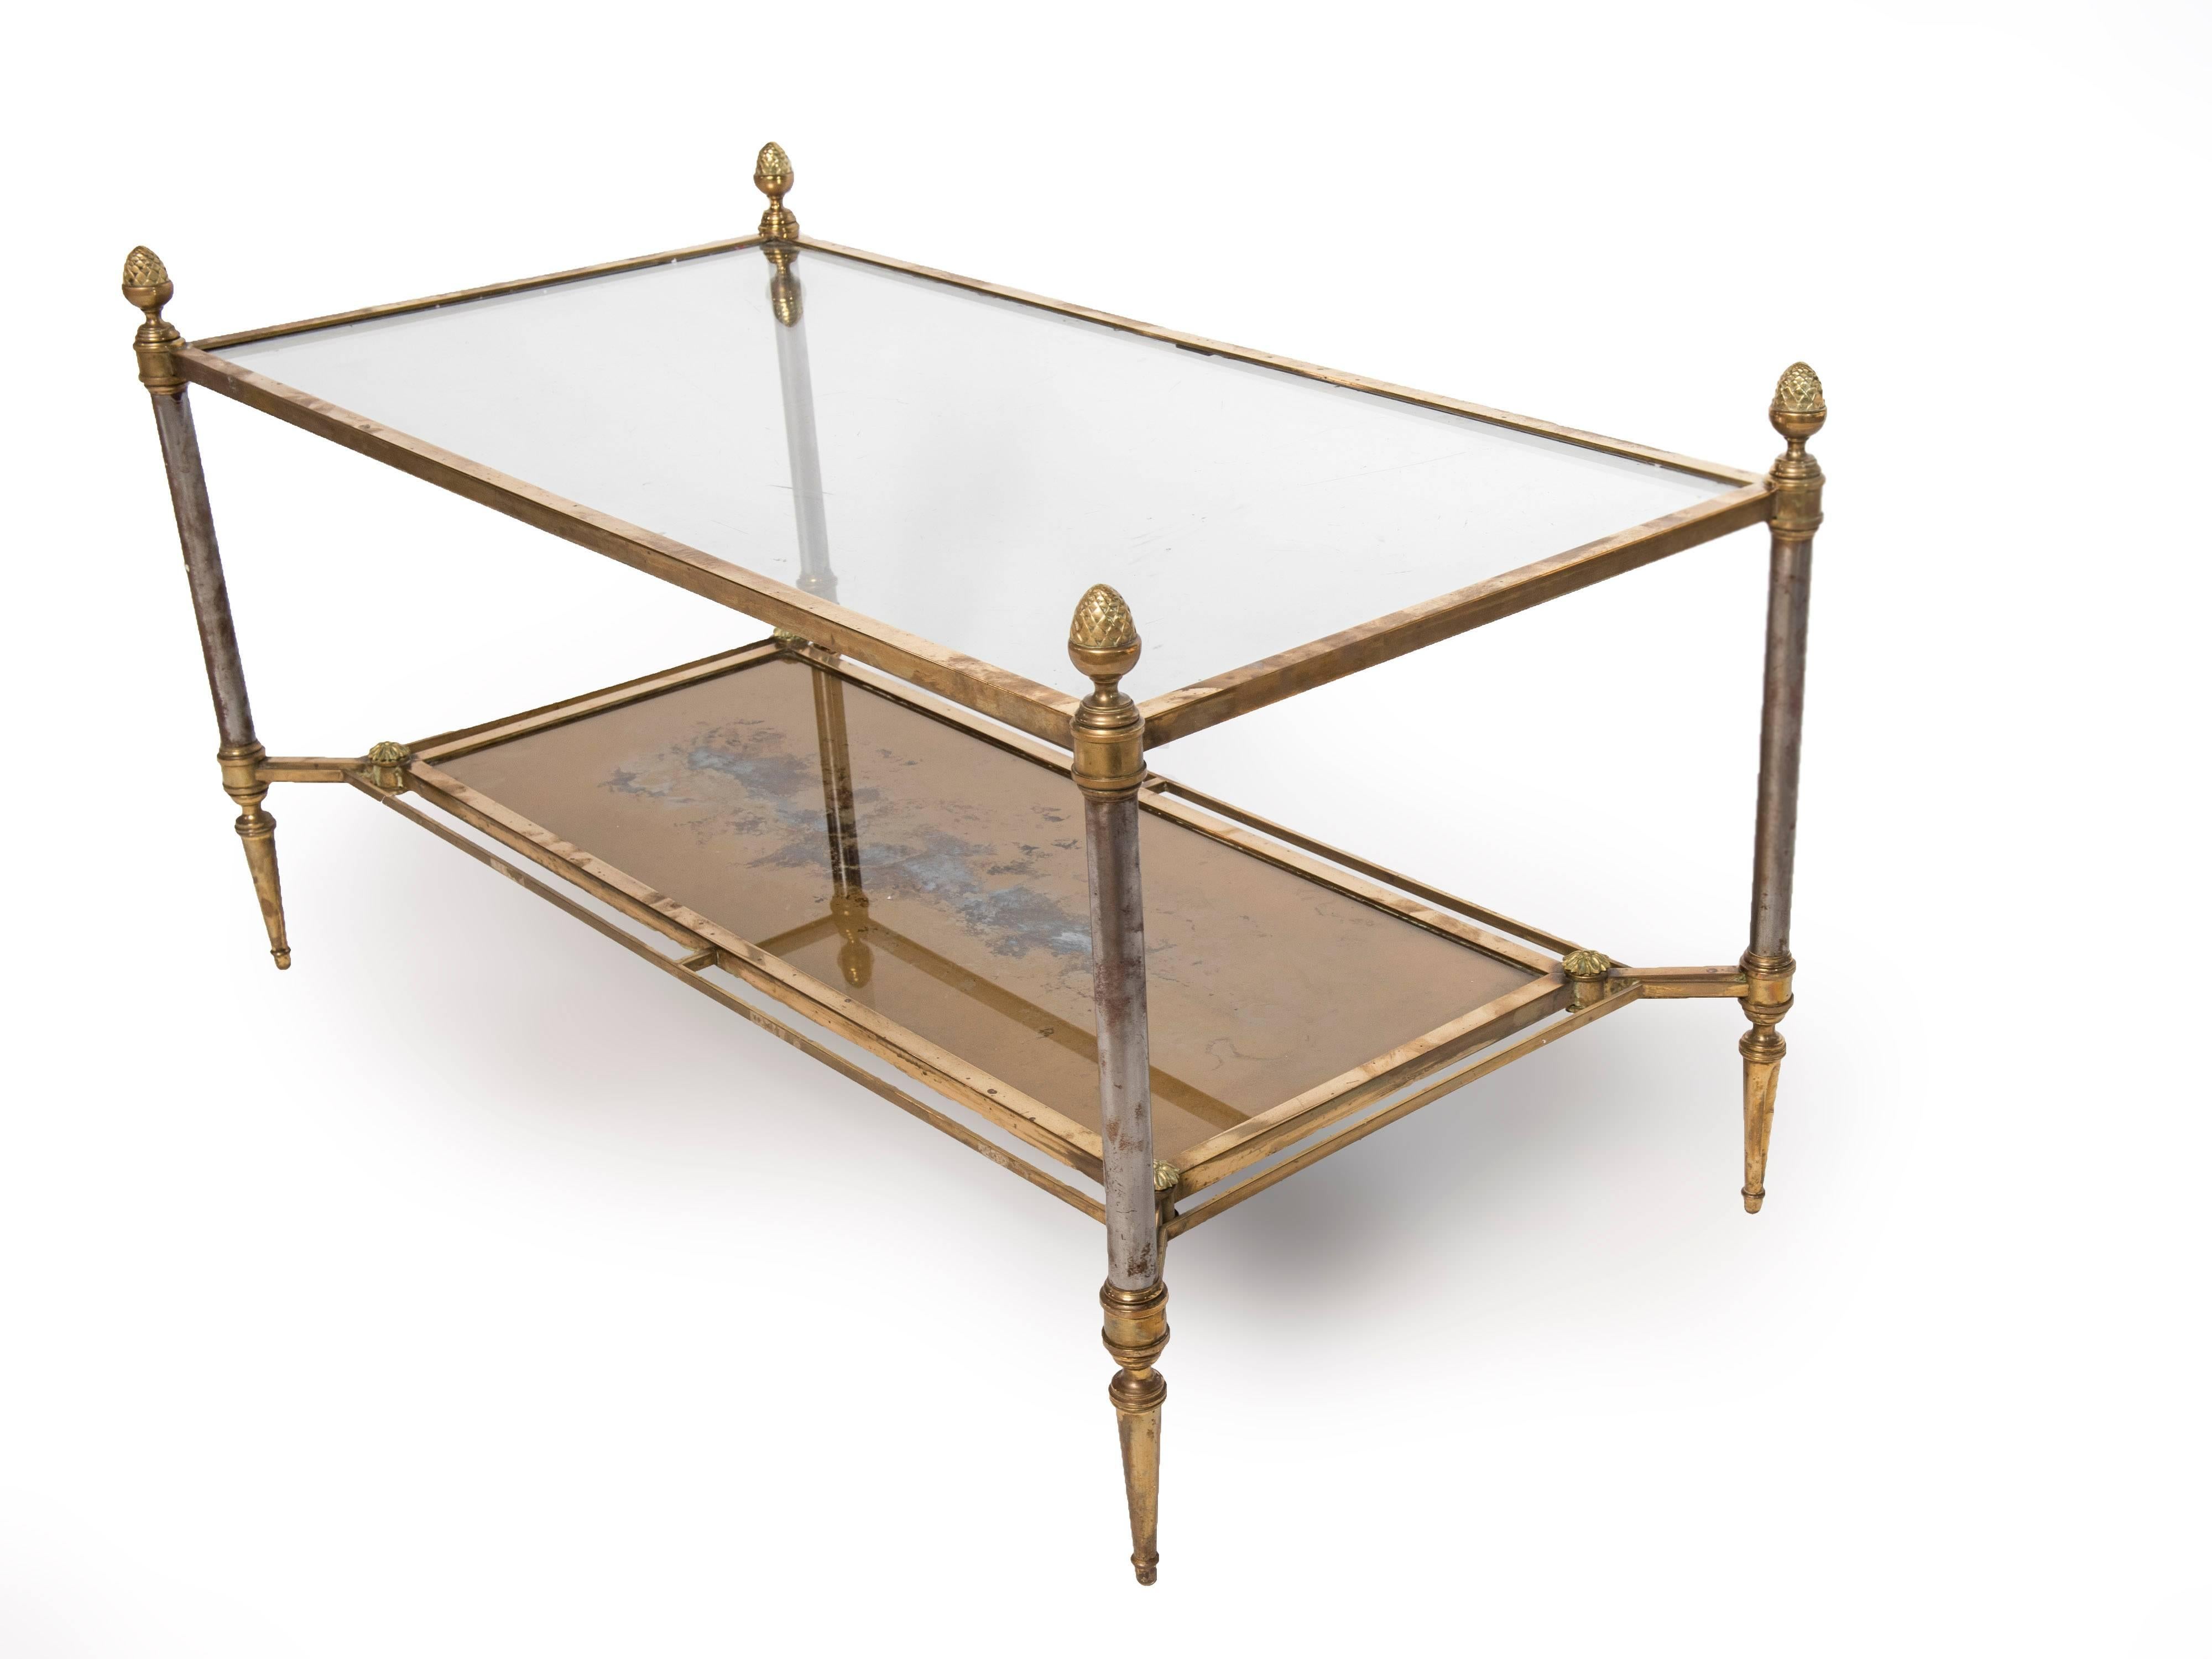 A rectangular brass-plated steel coffee table with a clear glass top and gold glass shelf below. The finials are solid brass. The posts are nickel plated which are showing some wear. The bottom gold glass shelf is worn from the underside which is